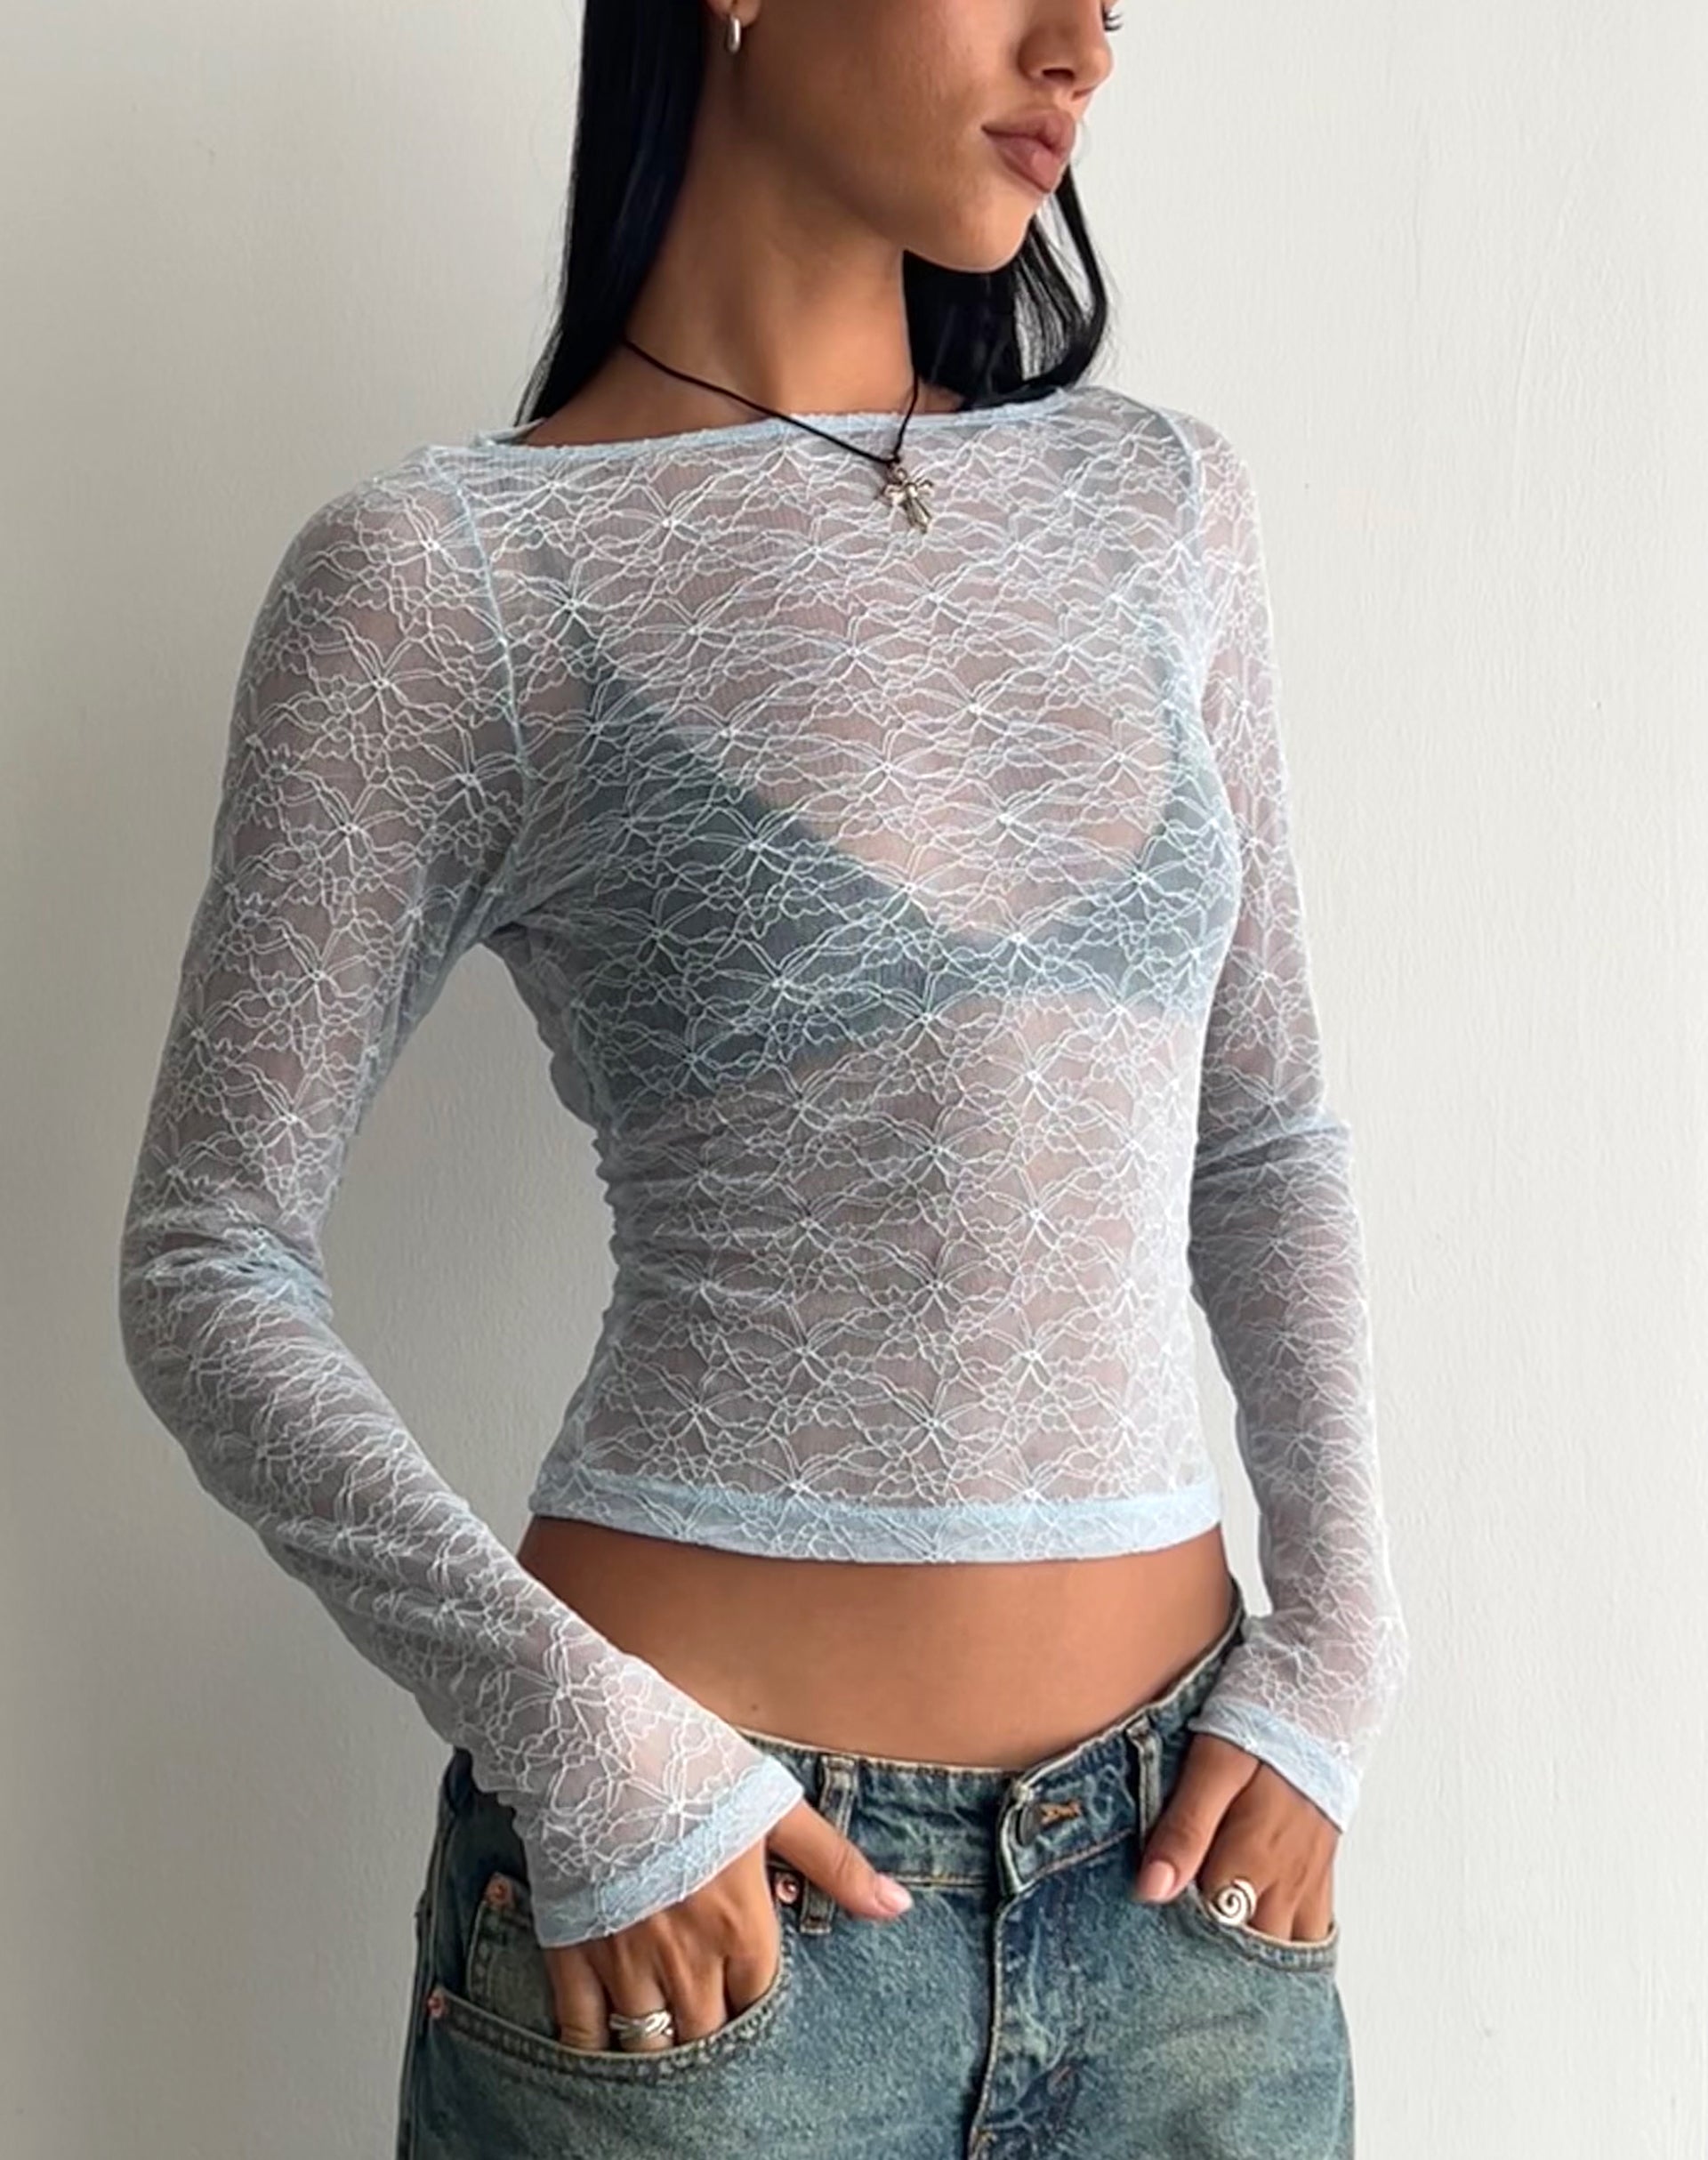 Amabon Long Sleeve Top in Lace Baby Blue